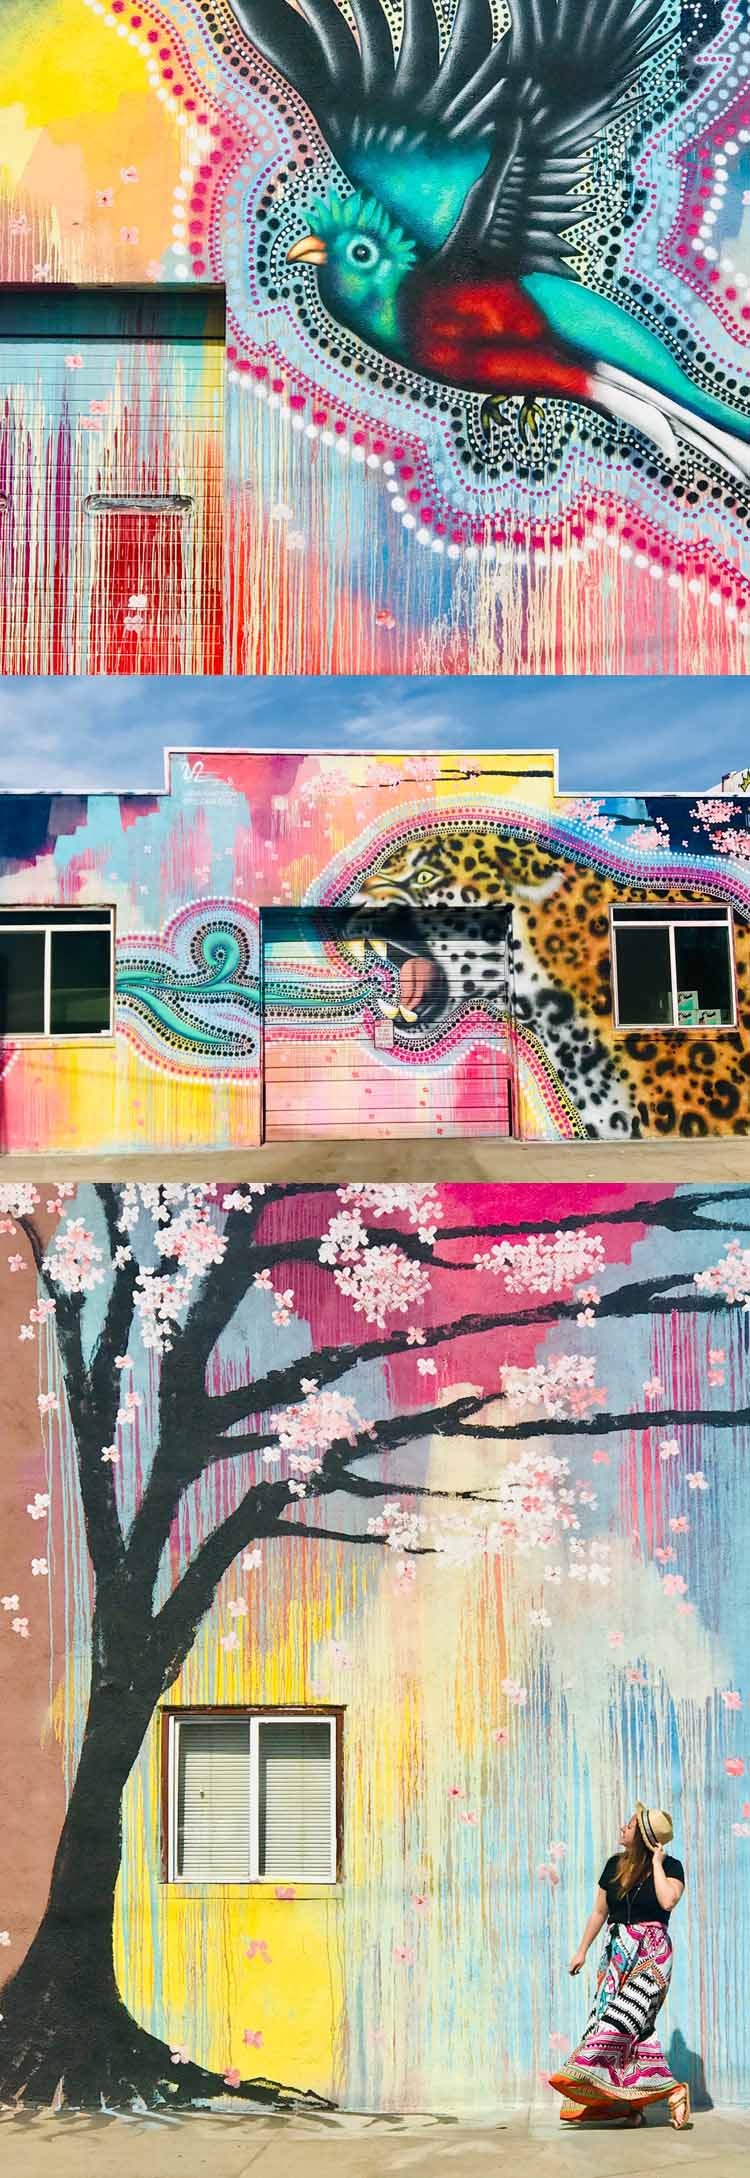 Love photography? The Denver street art scene has exploded with murals and graffiti everywhere you turn. Here are the best ones to blow up the 'Gram and enjoy the art in colorful Colorado. Spoiler: it's one of the best things to do in Denver! #streetart #denver #colorado #usa #graffiti #art #travel #weekendgetaway